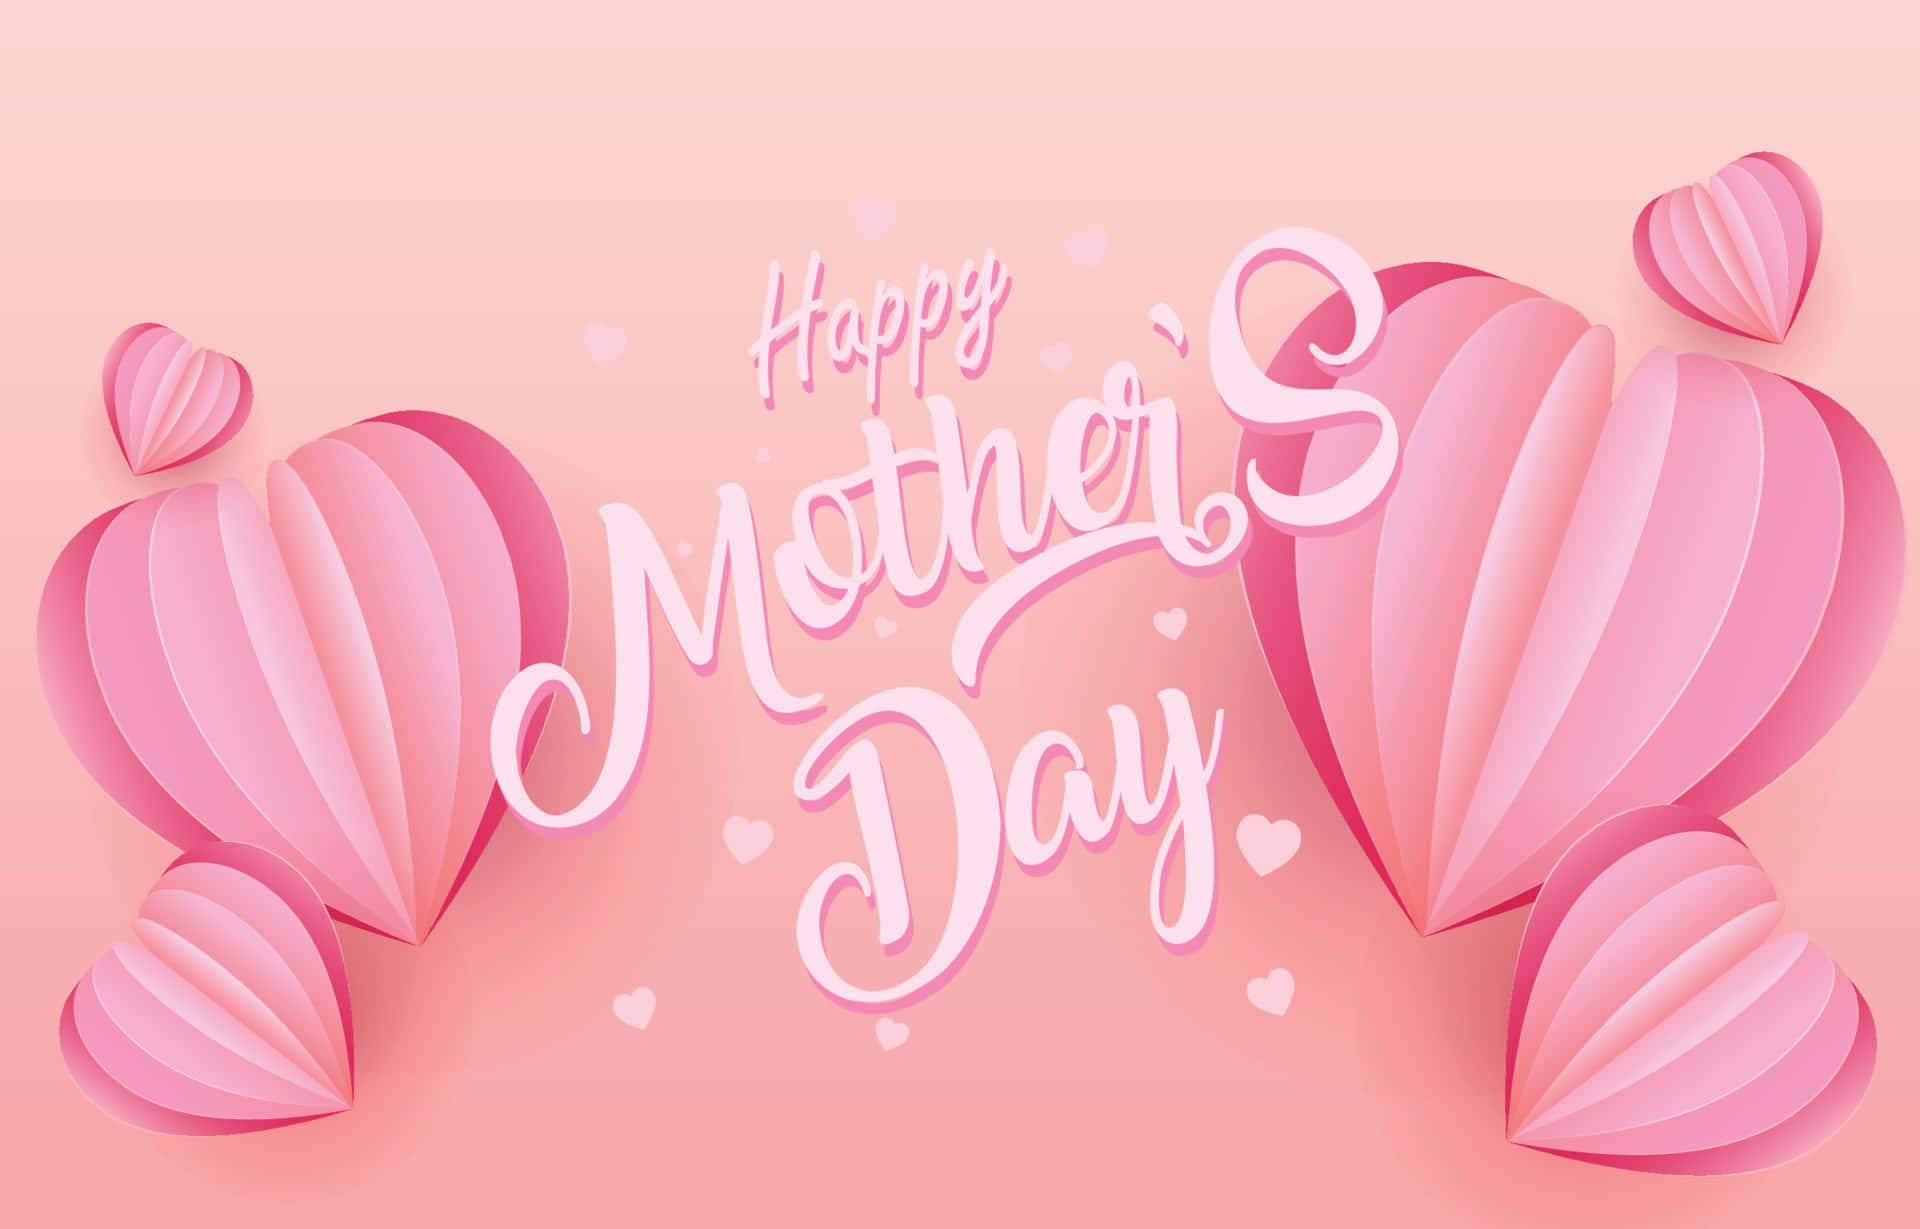 Wishing every mother a very Happy Mothers Day! Wallpaper